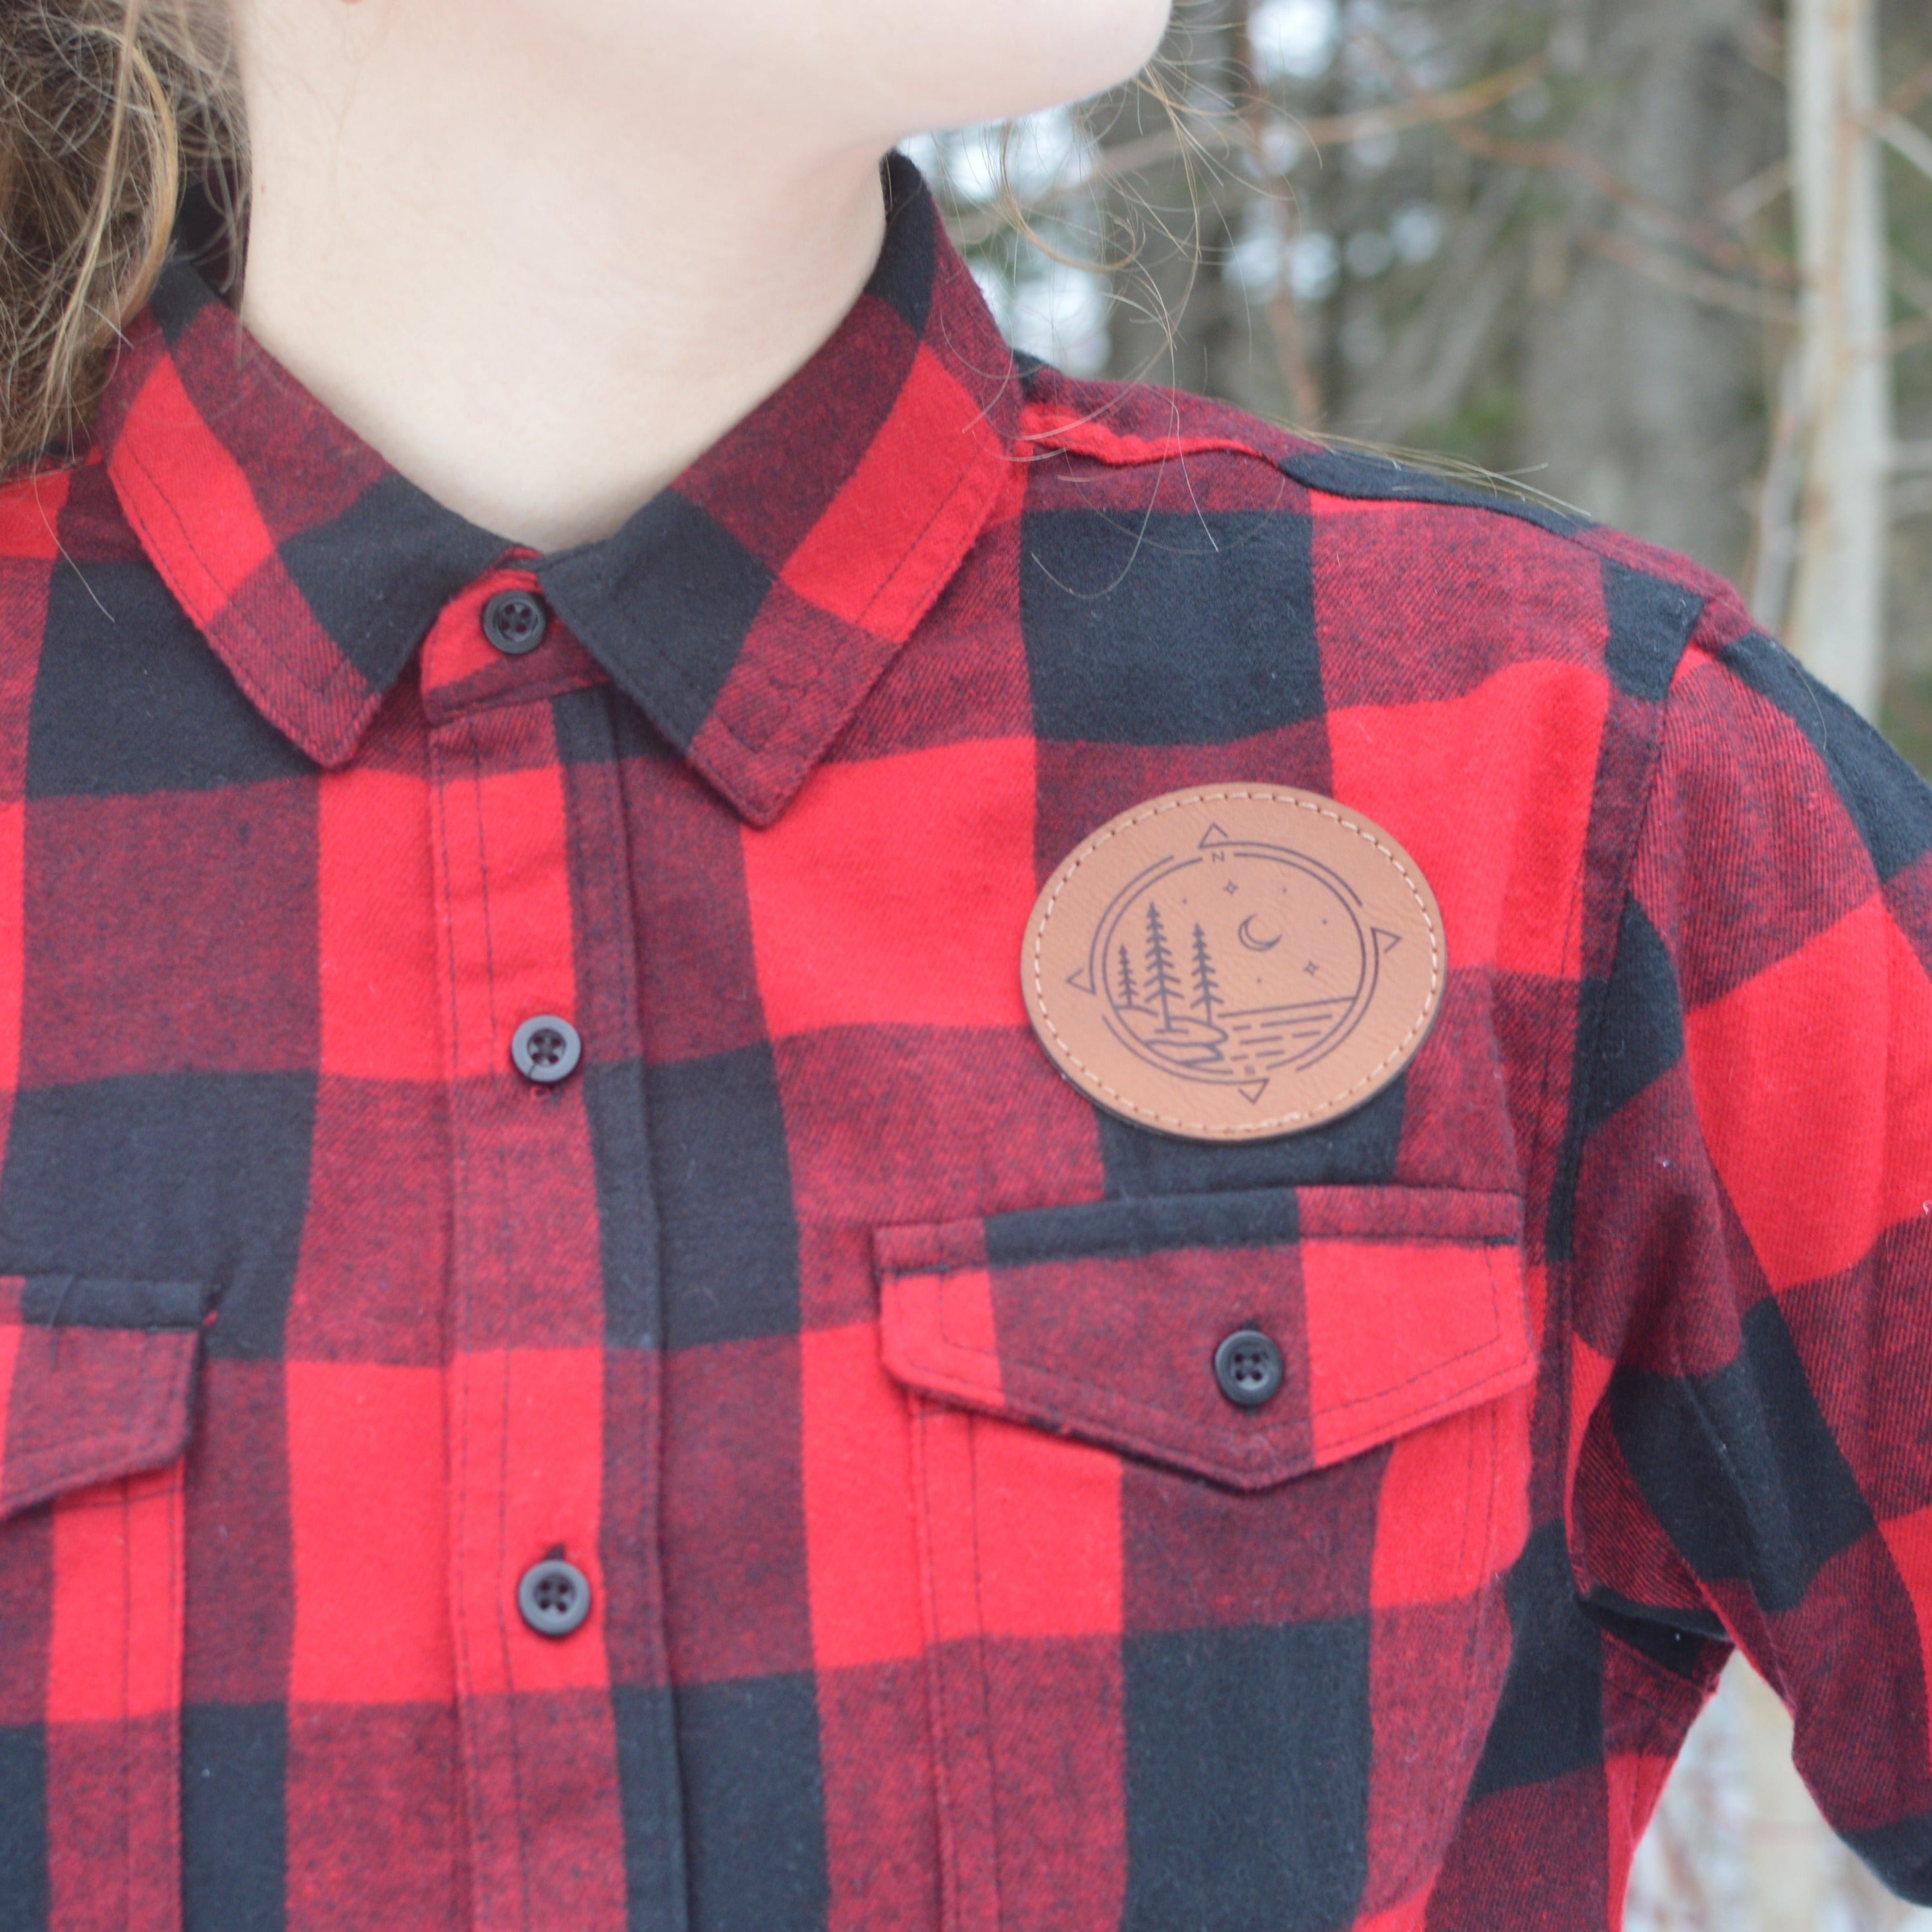 North & Shore Patch - Adult Flannel